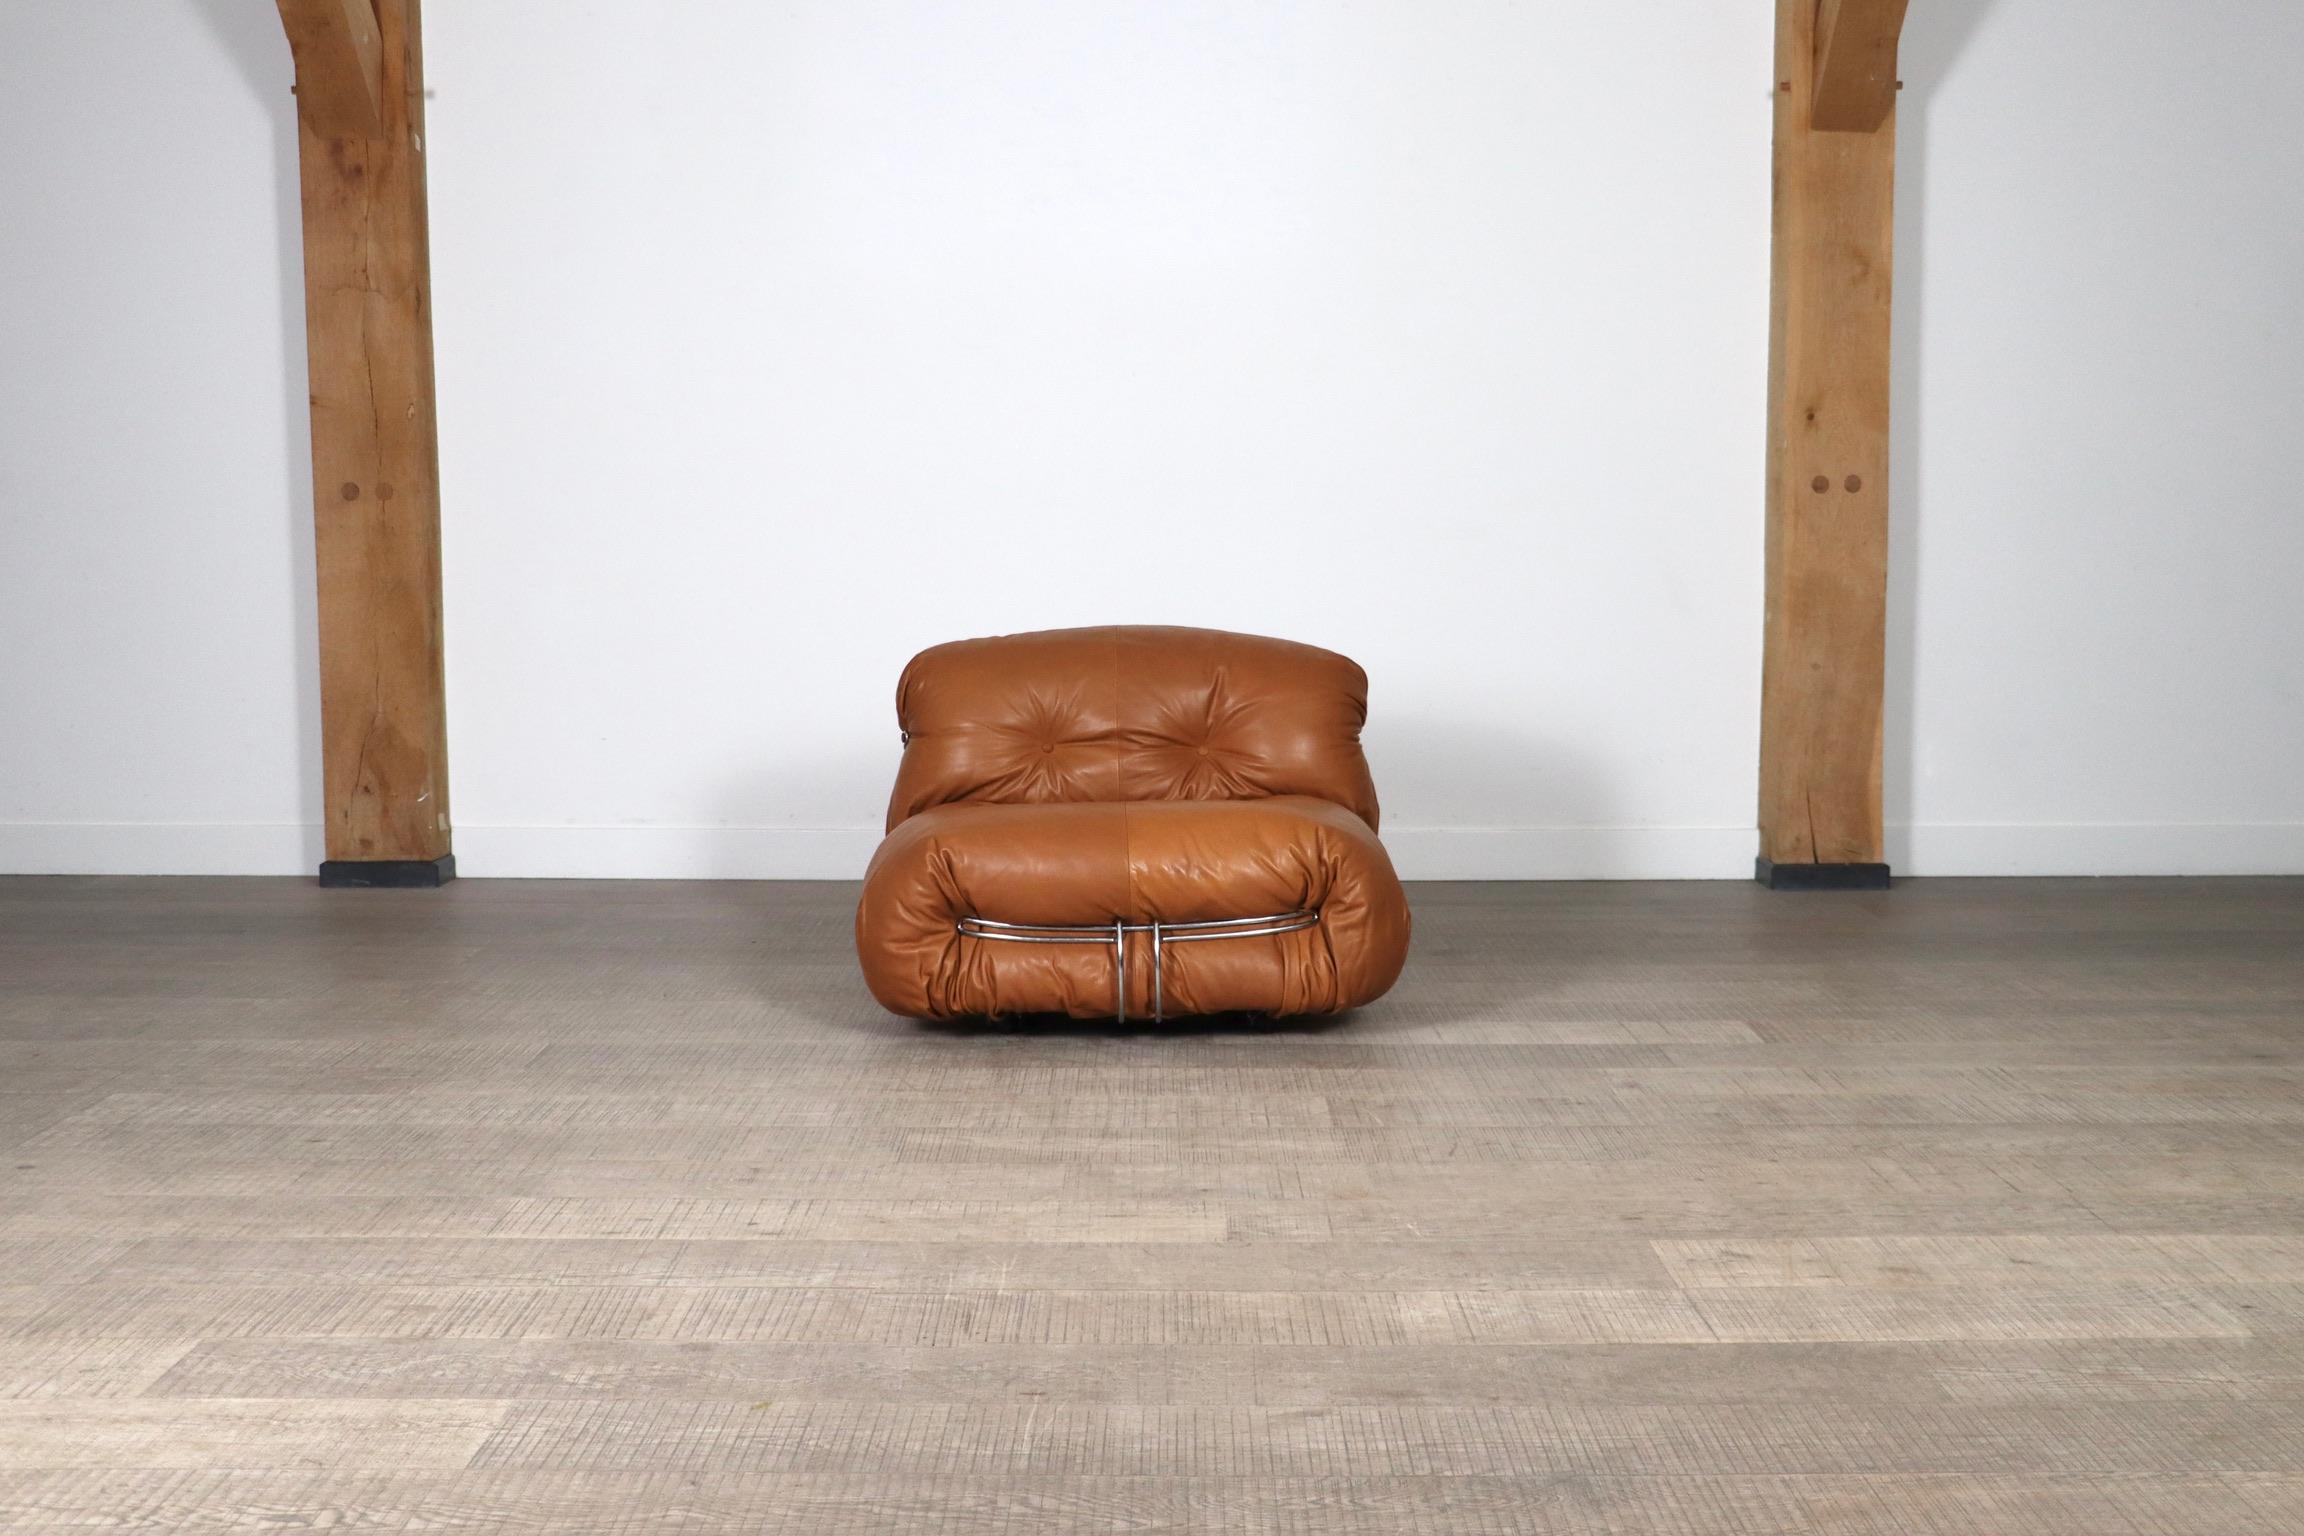 Stunning vintage Soriana lounge chair in cognac leather by Afra and Tobia Scarpa for Cassina, Italy 1970s. This edition is reupholstered in stunning high quality cognac aniline leather, which will catch anyones eye. The colour of the leather